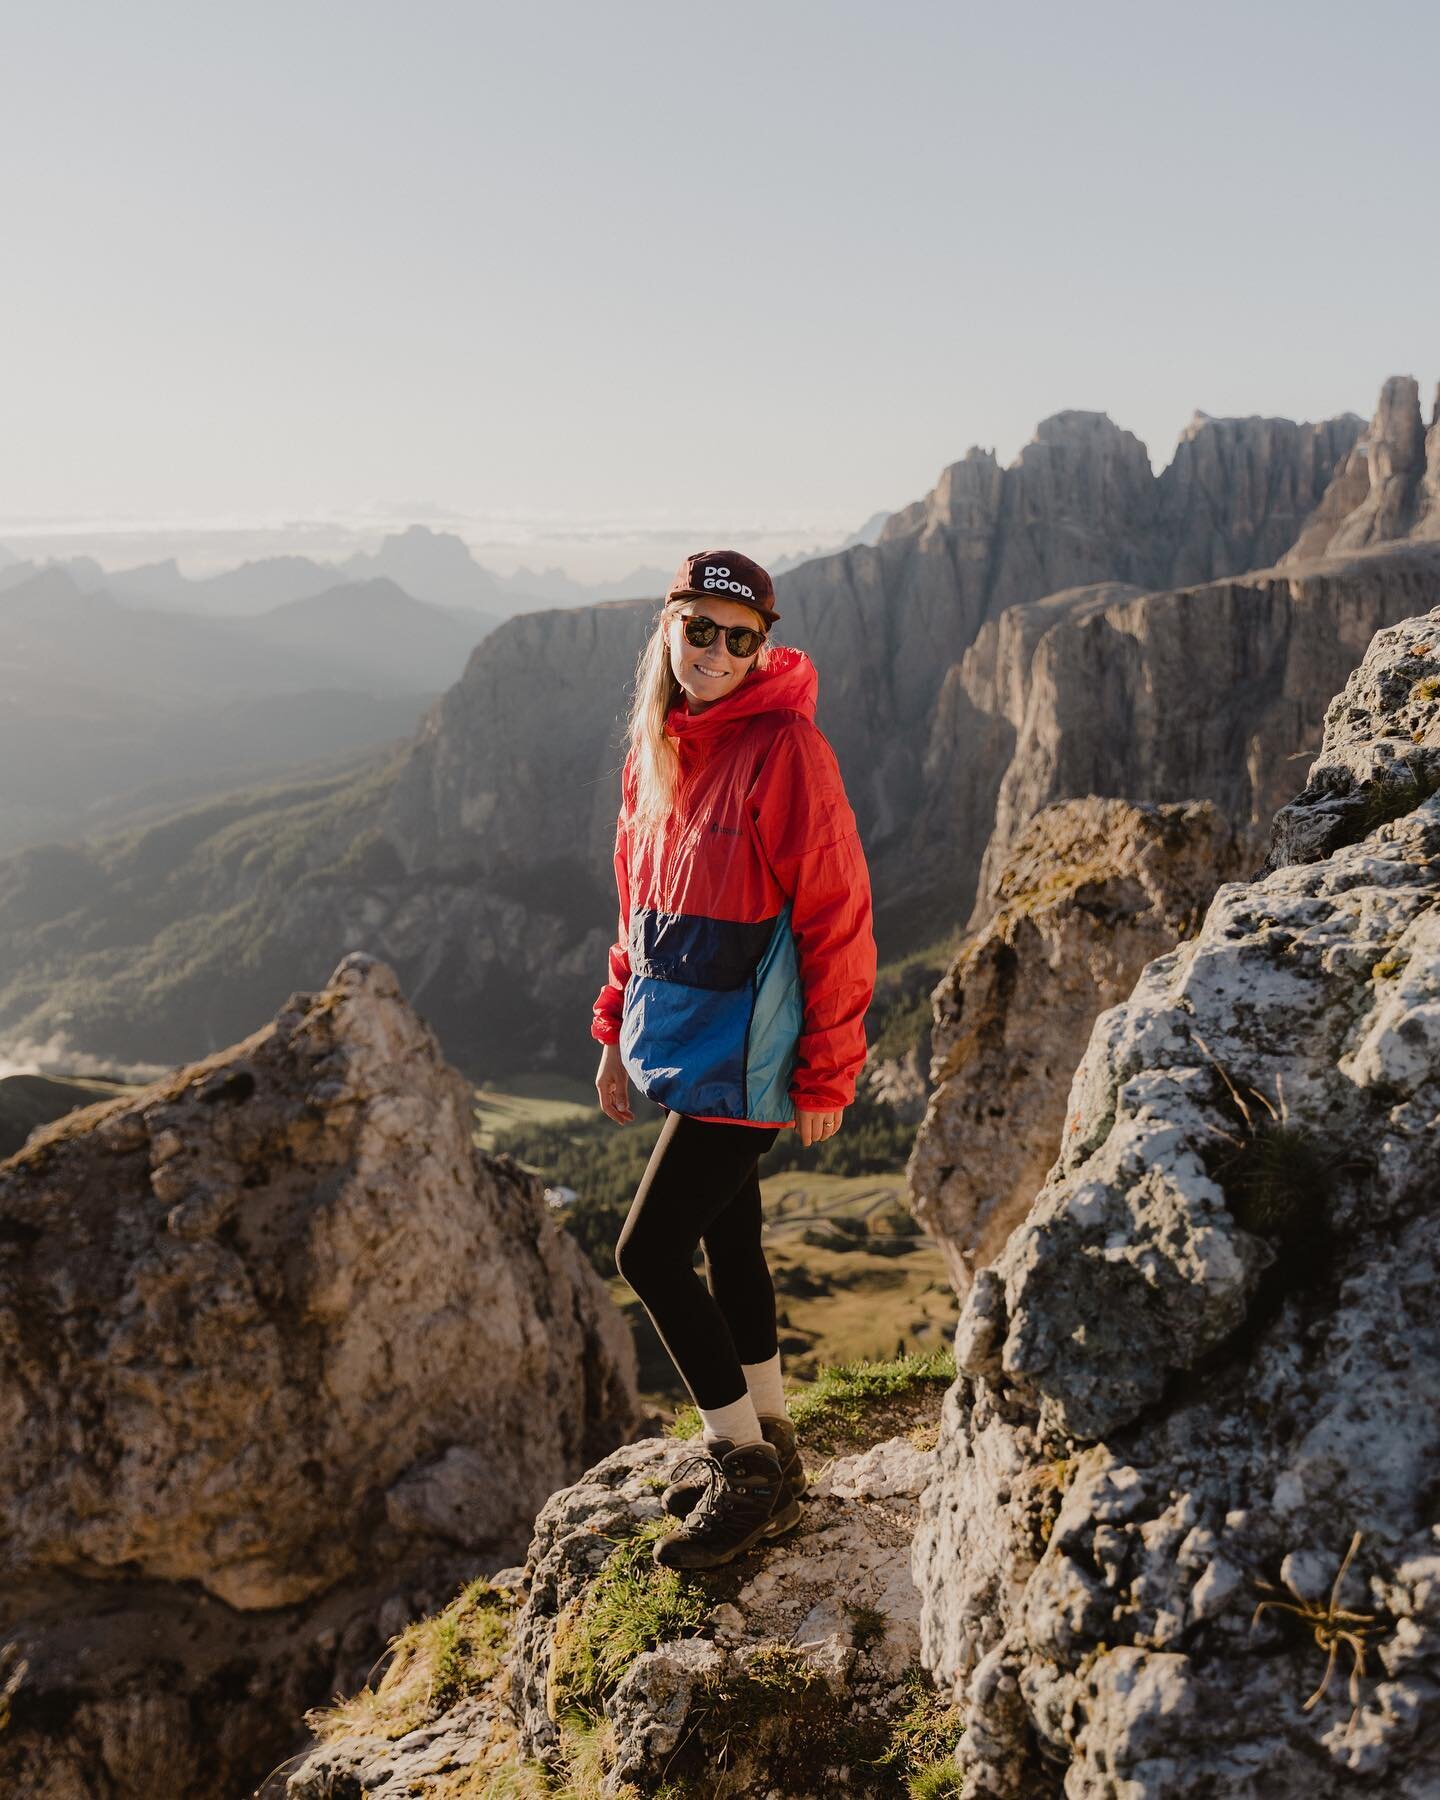 SAVE this hike if you are heading to the Dolomites!

Located in Alta Badia region, Gran Cir is an incredible short hike with a big reward. 

- Give yourself 2 to 3 hours round trip and pack a picnic for the top. 
- It&rsquo;s a via ferrata track mean